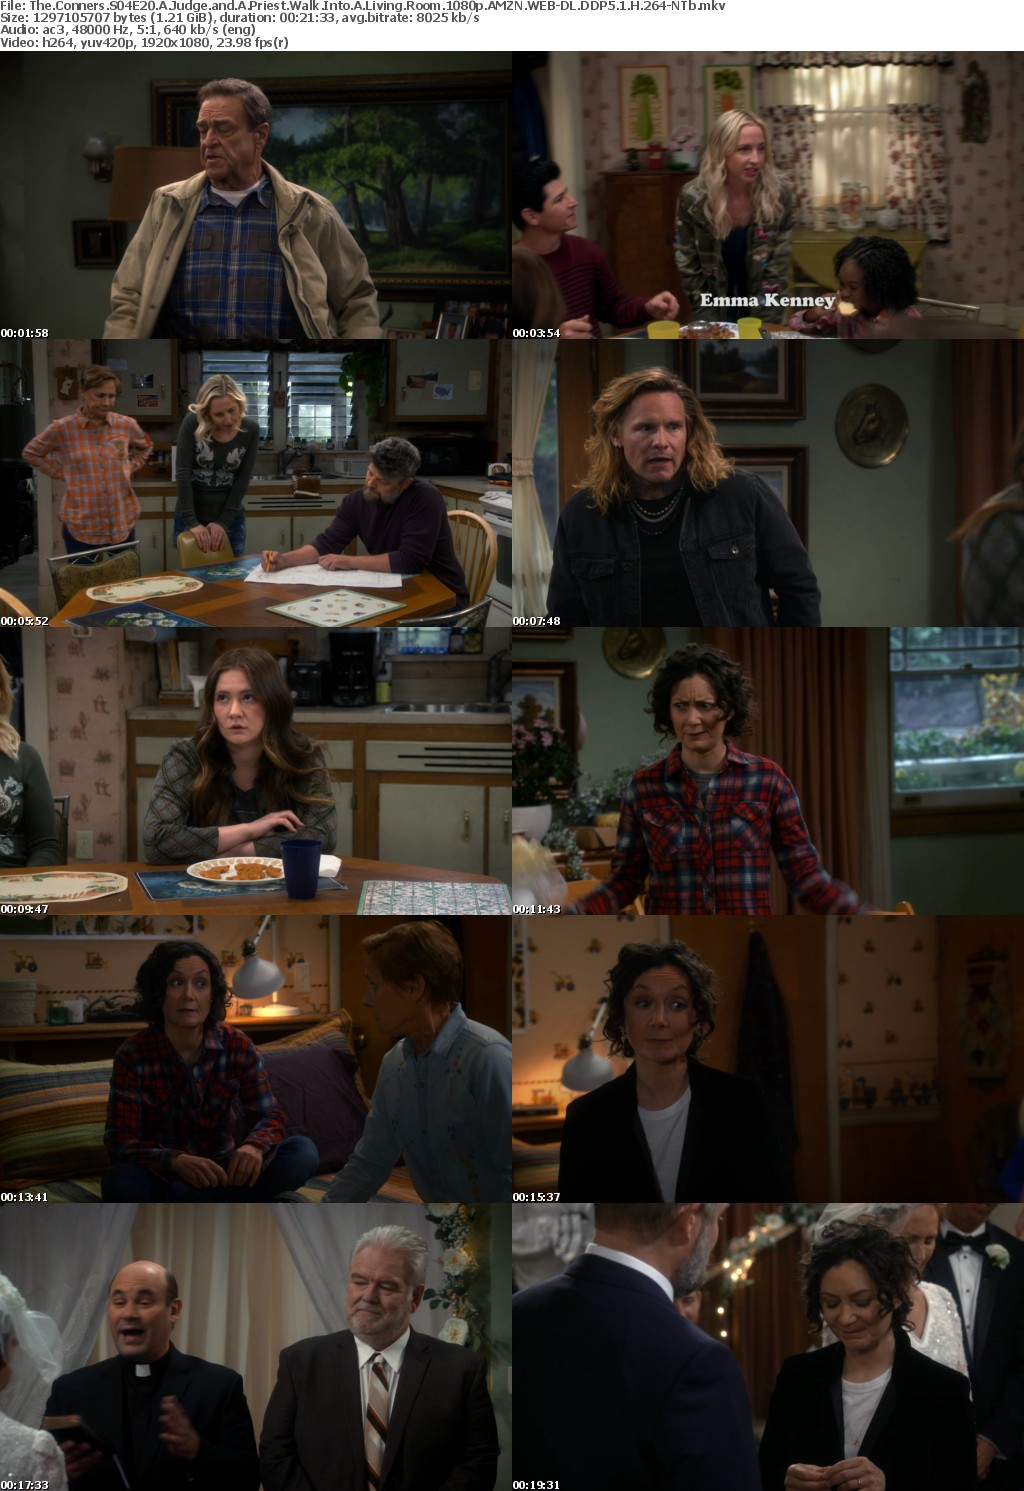 The Conners S04E20 A Judge and A Priest Walk Into A Living Room 1080p AMZN WEBRip DDP5 1 x264-NTb